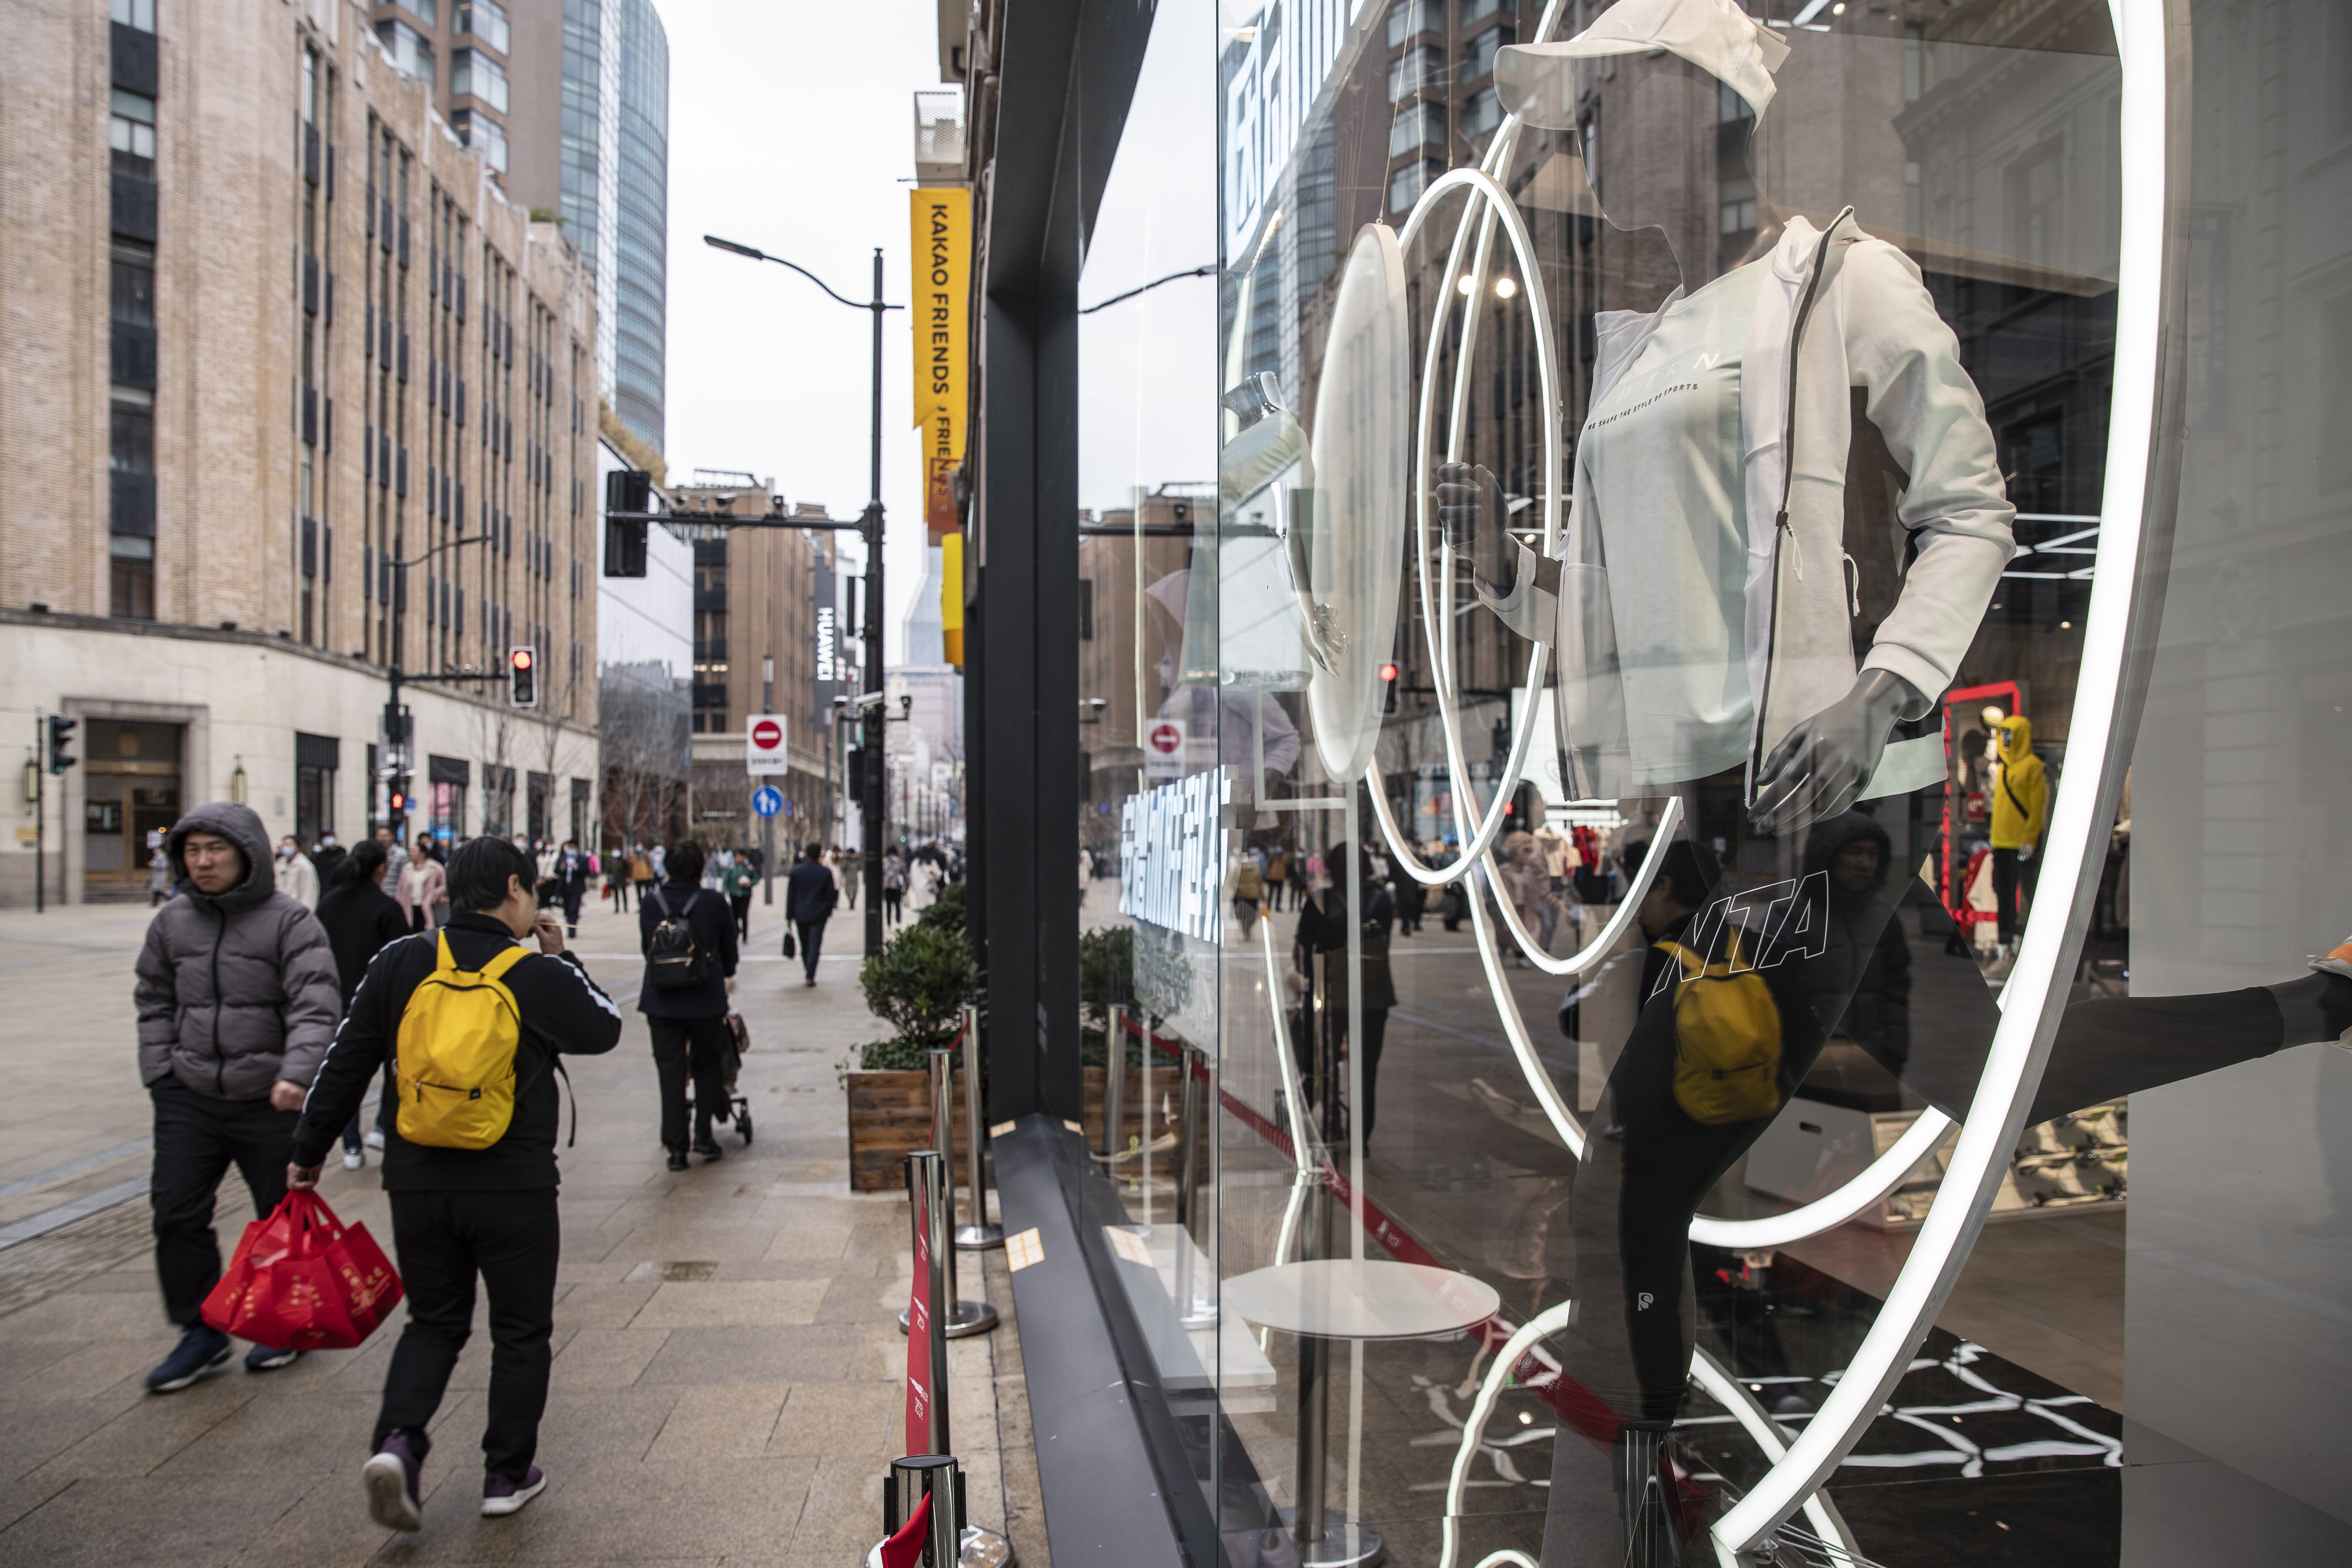 Pedestrians walk past an Anta Sports Products store in Shanghai in March 2021. Photo: bloomberg